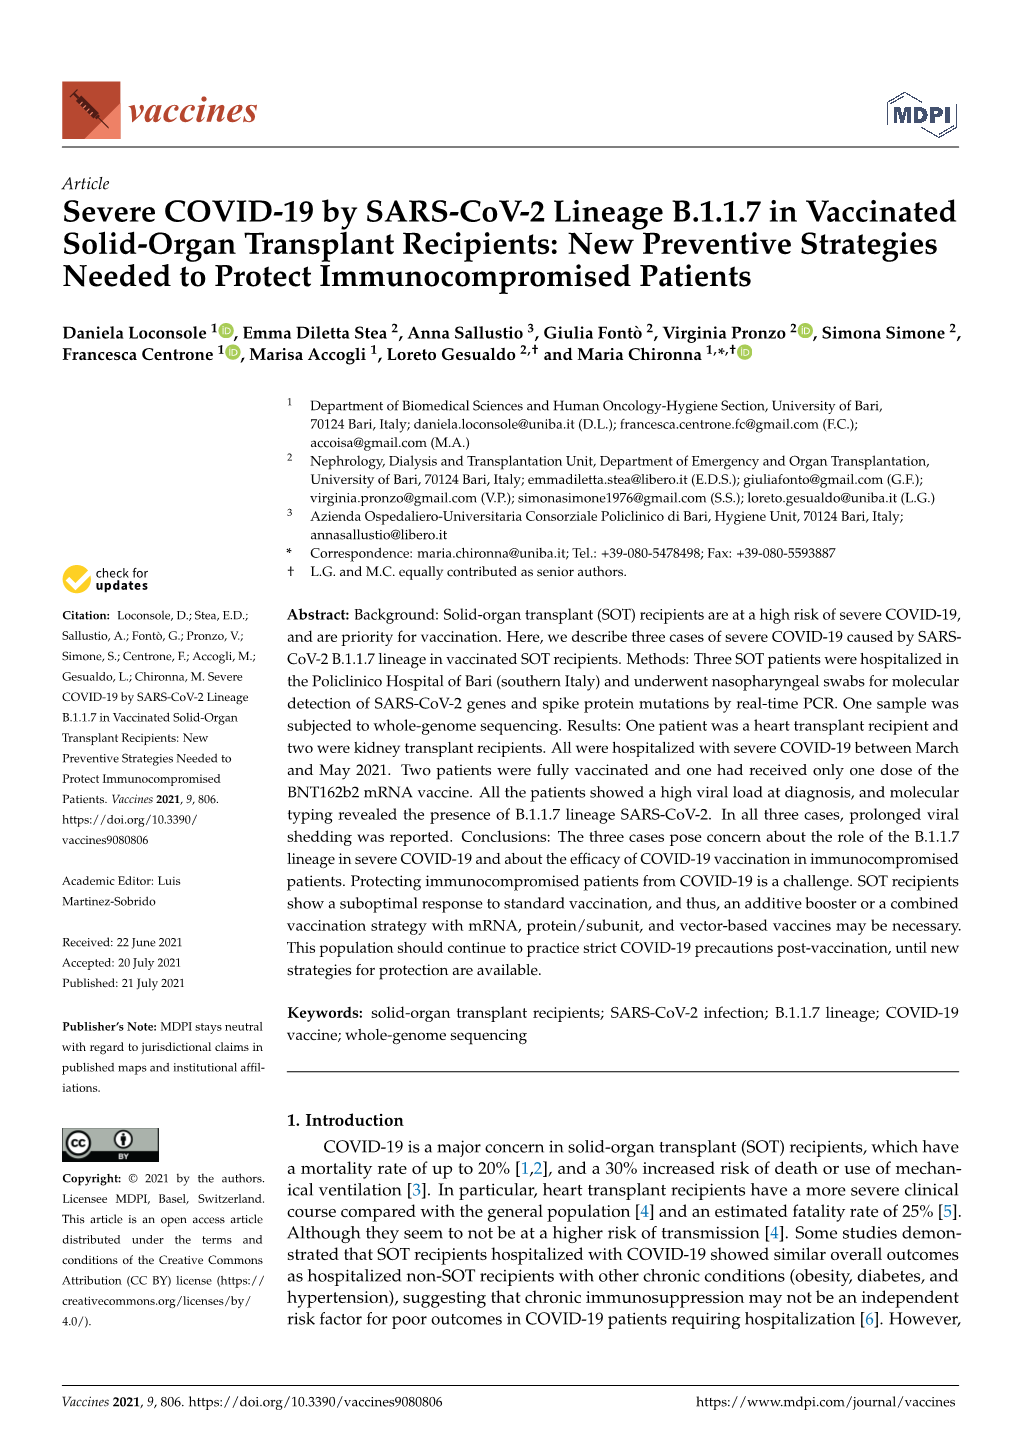 Severe COVID-19 by SARS-Cov-2 Lineage B.1.1.7 in Vaccinated Solid-Organ Transplant Recipients: New Preventive Strategies Needed to Protect Immunocompromised Patients